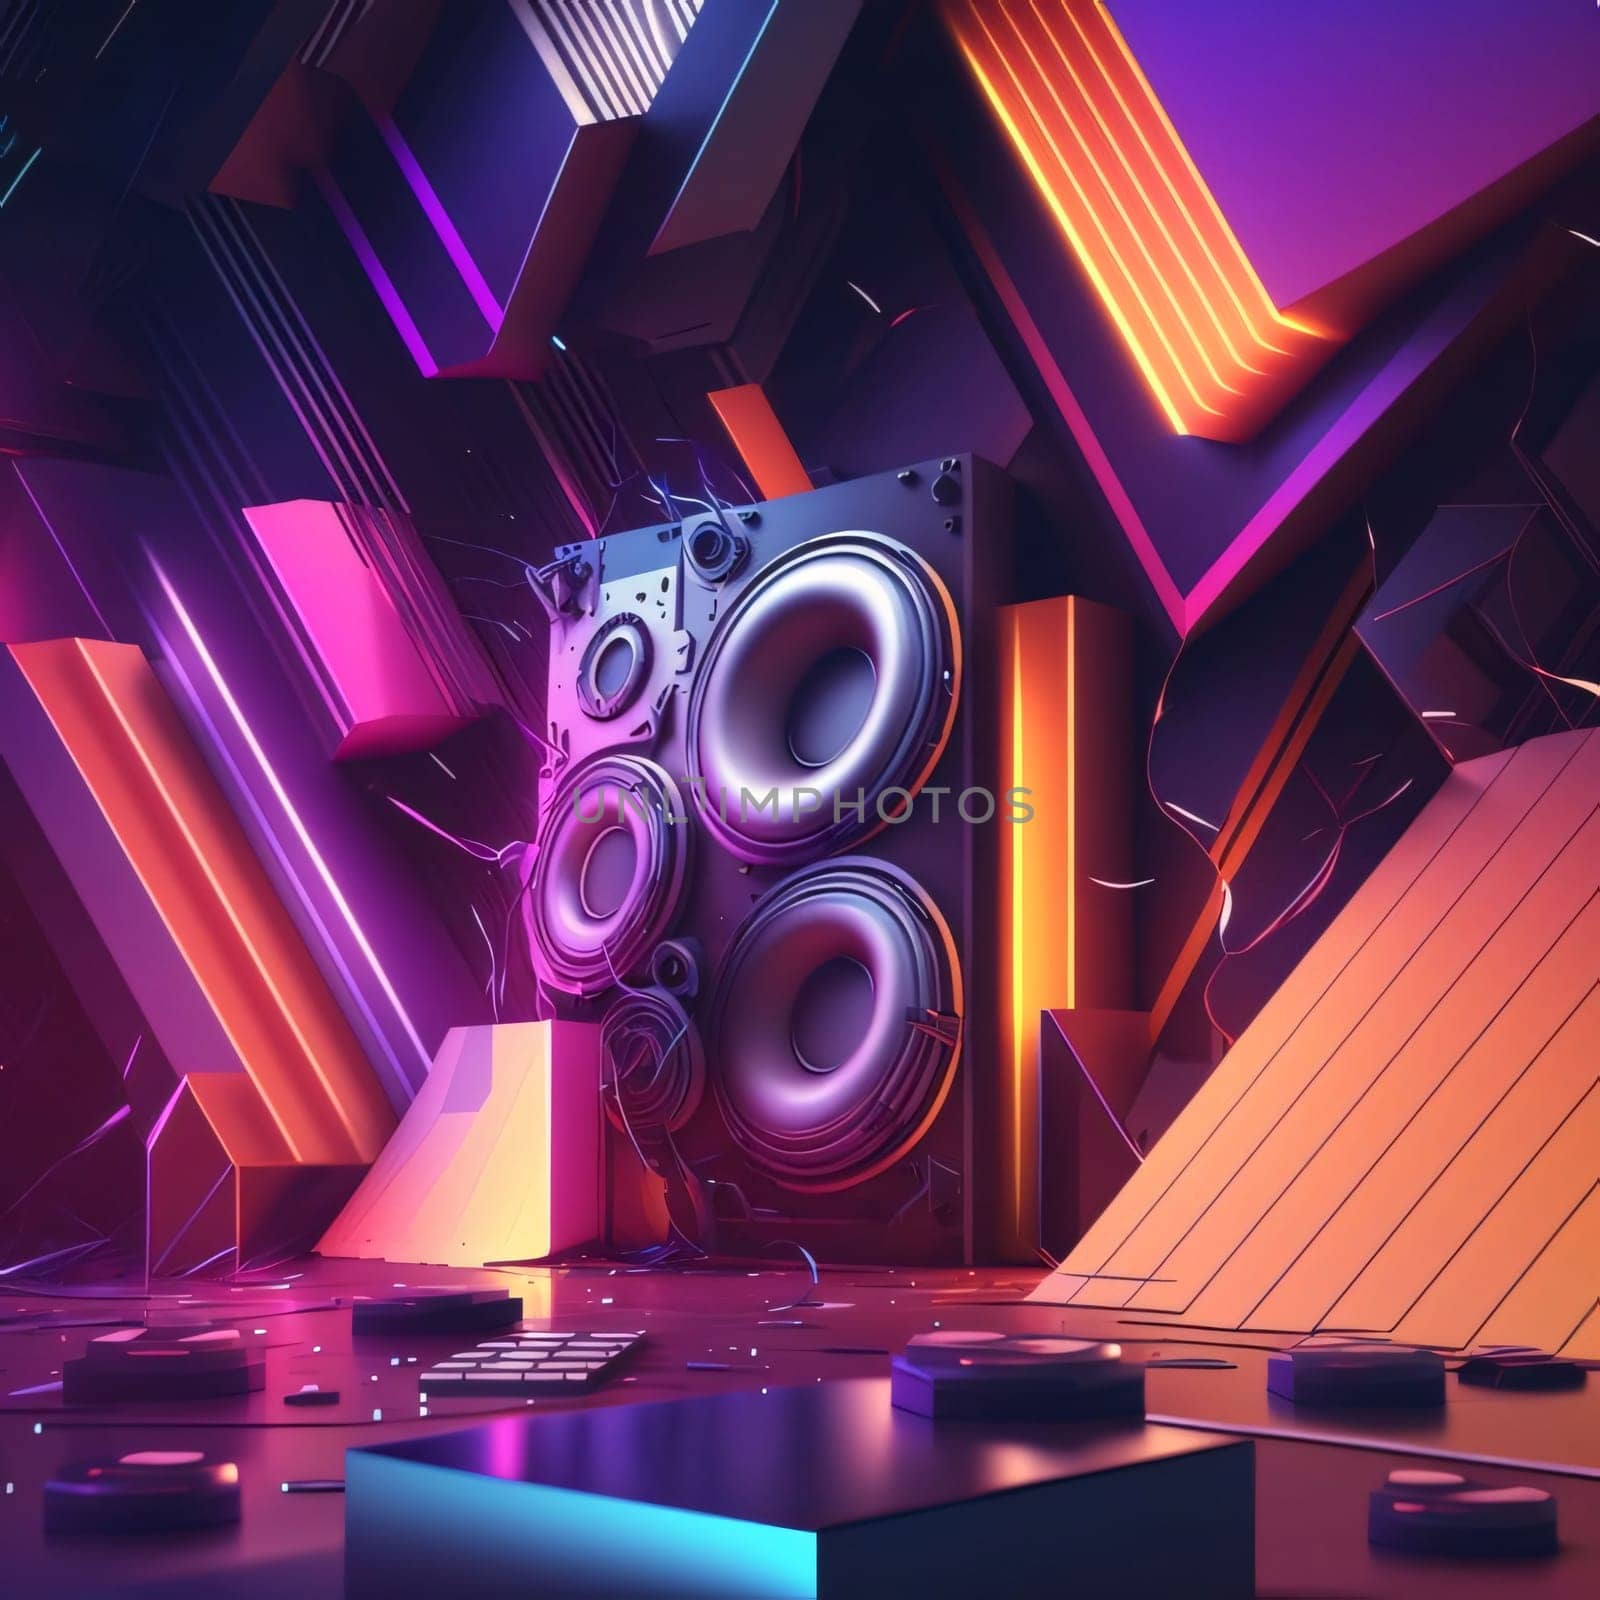 Abstract background design: 3d render, abstract techno background with speakers, neon lights and cubes